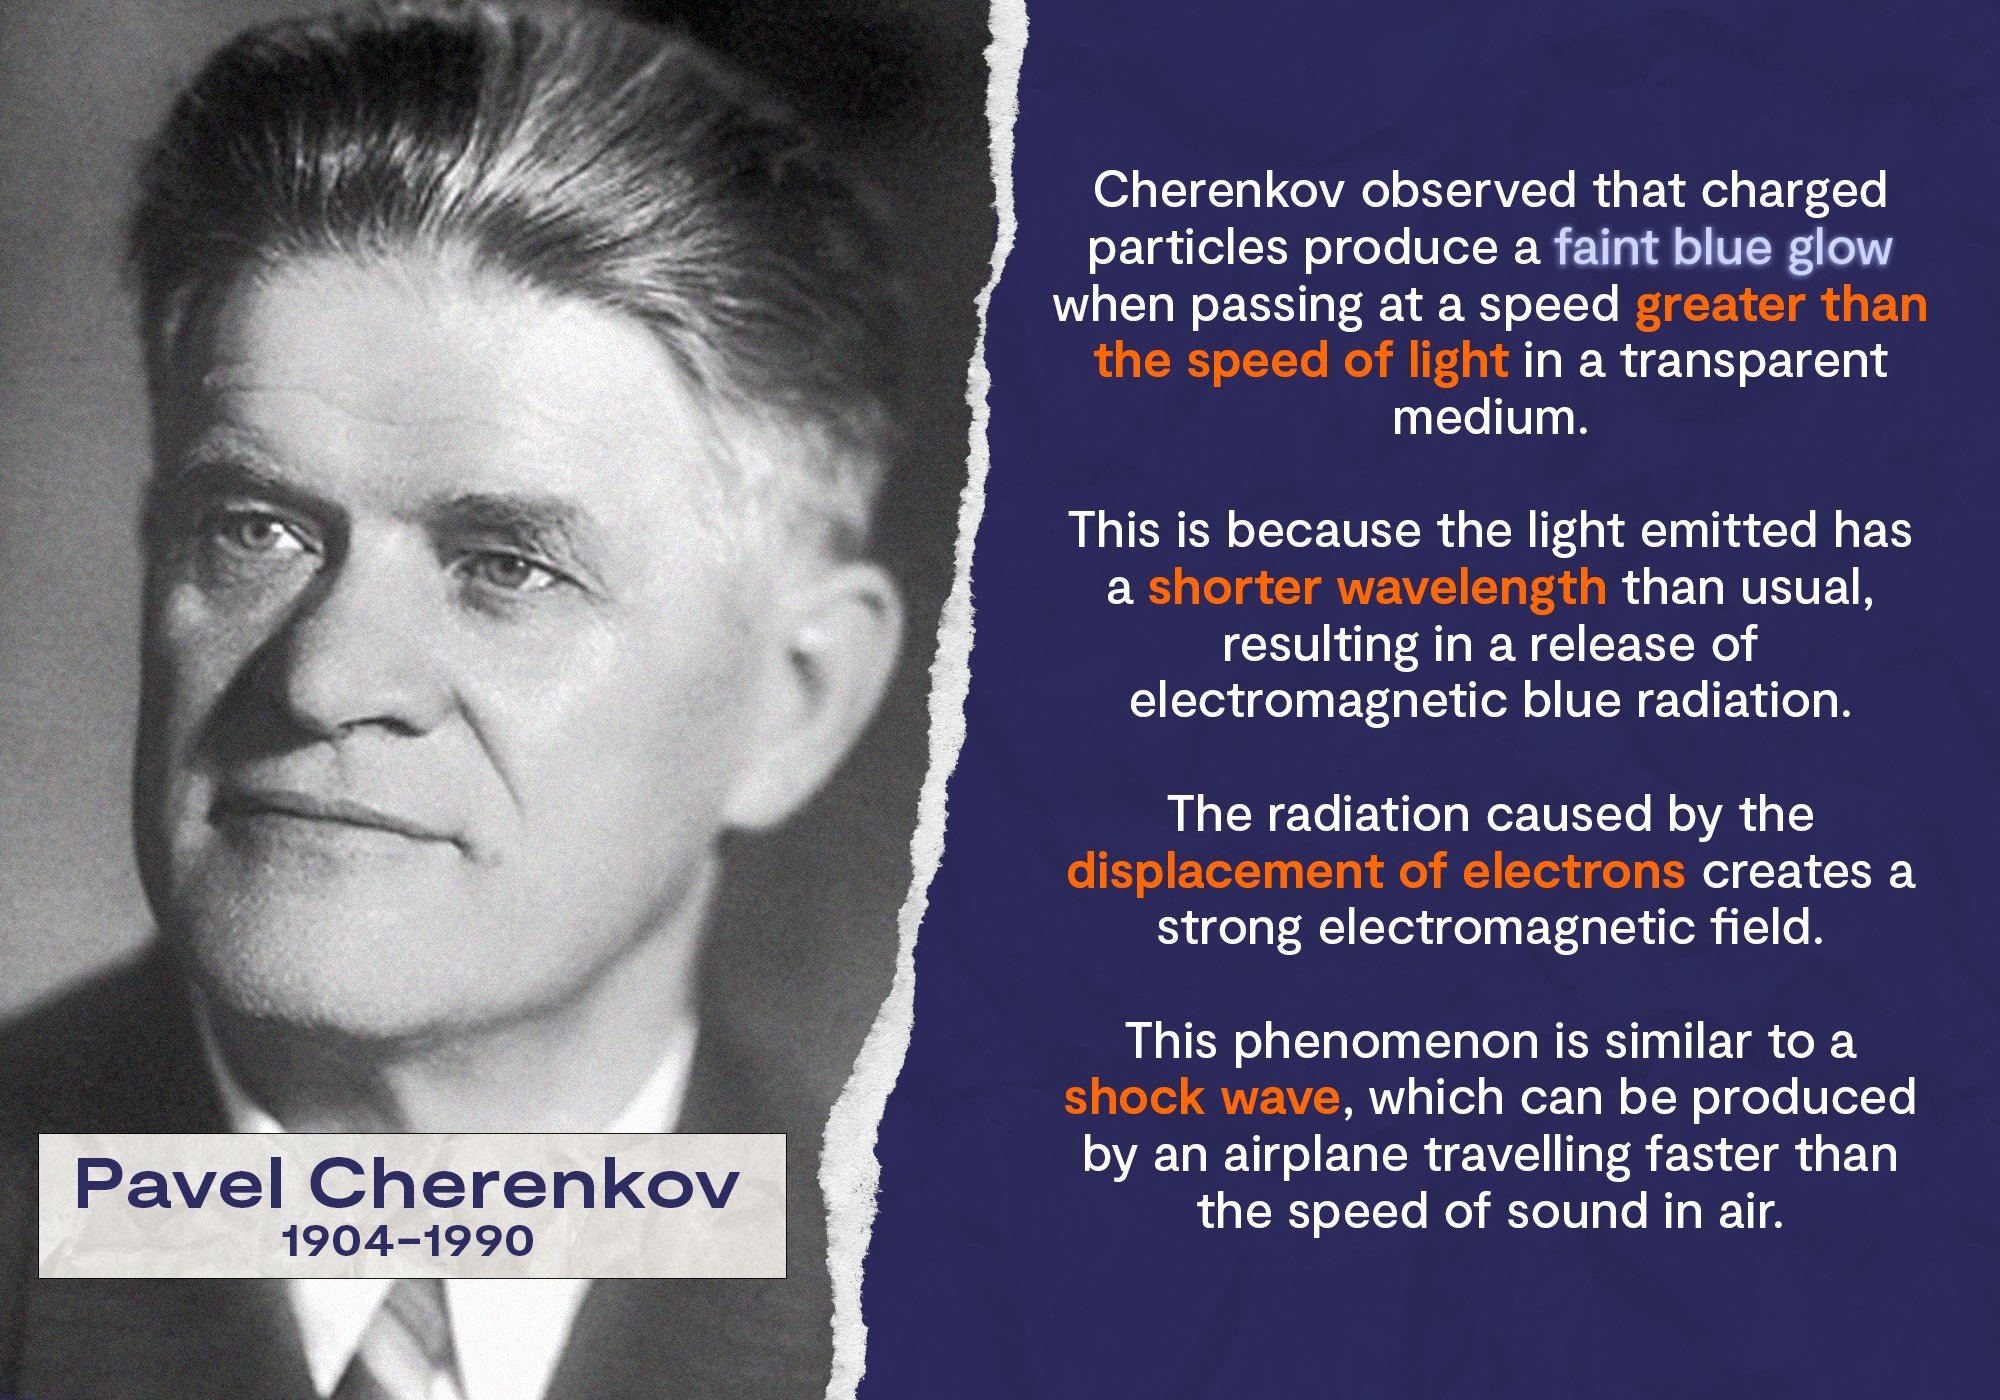 STFC Particle Physics on Twitter: "#OTD in 1904, the Soviet physicist Pavel Cherenkov was born! 🎂 He won the @NobelPrize in 1958 for his remarkable contribution to the development of electron accelerators